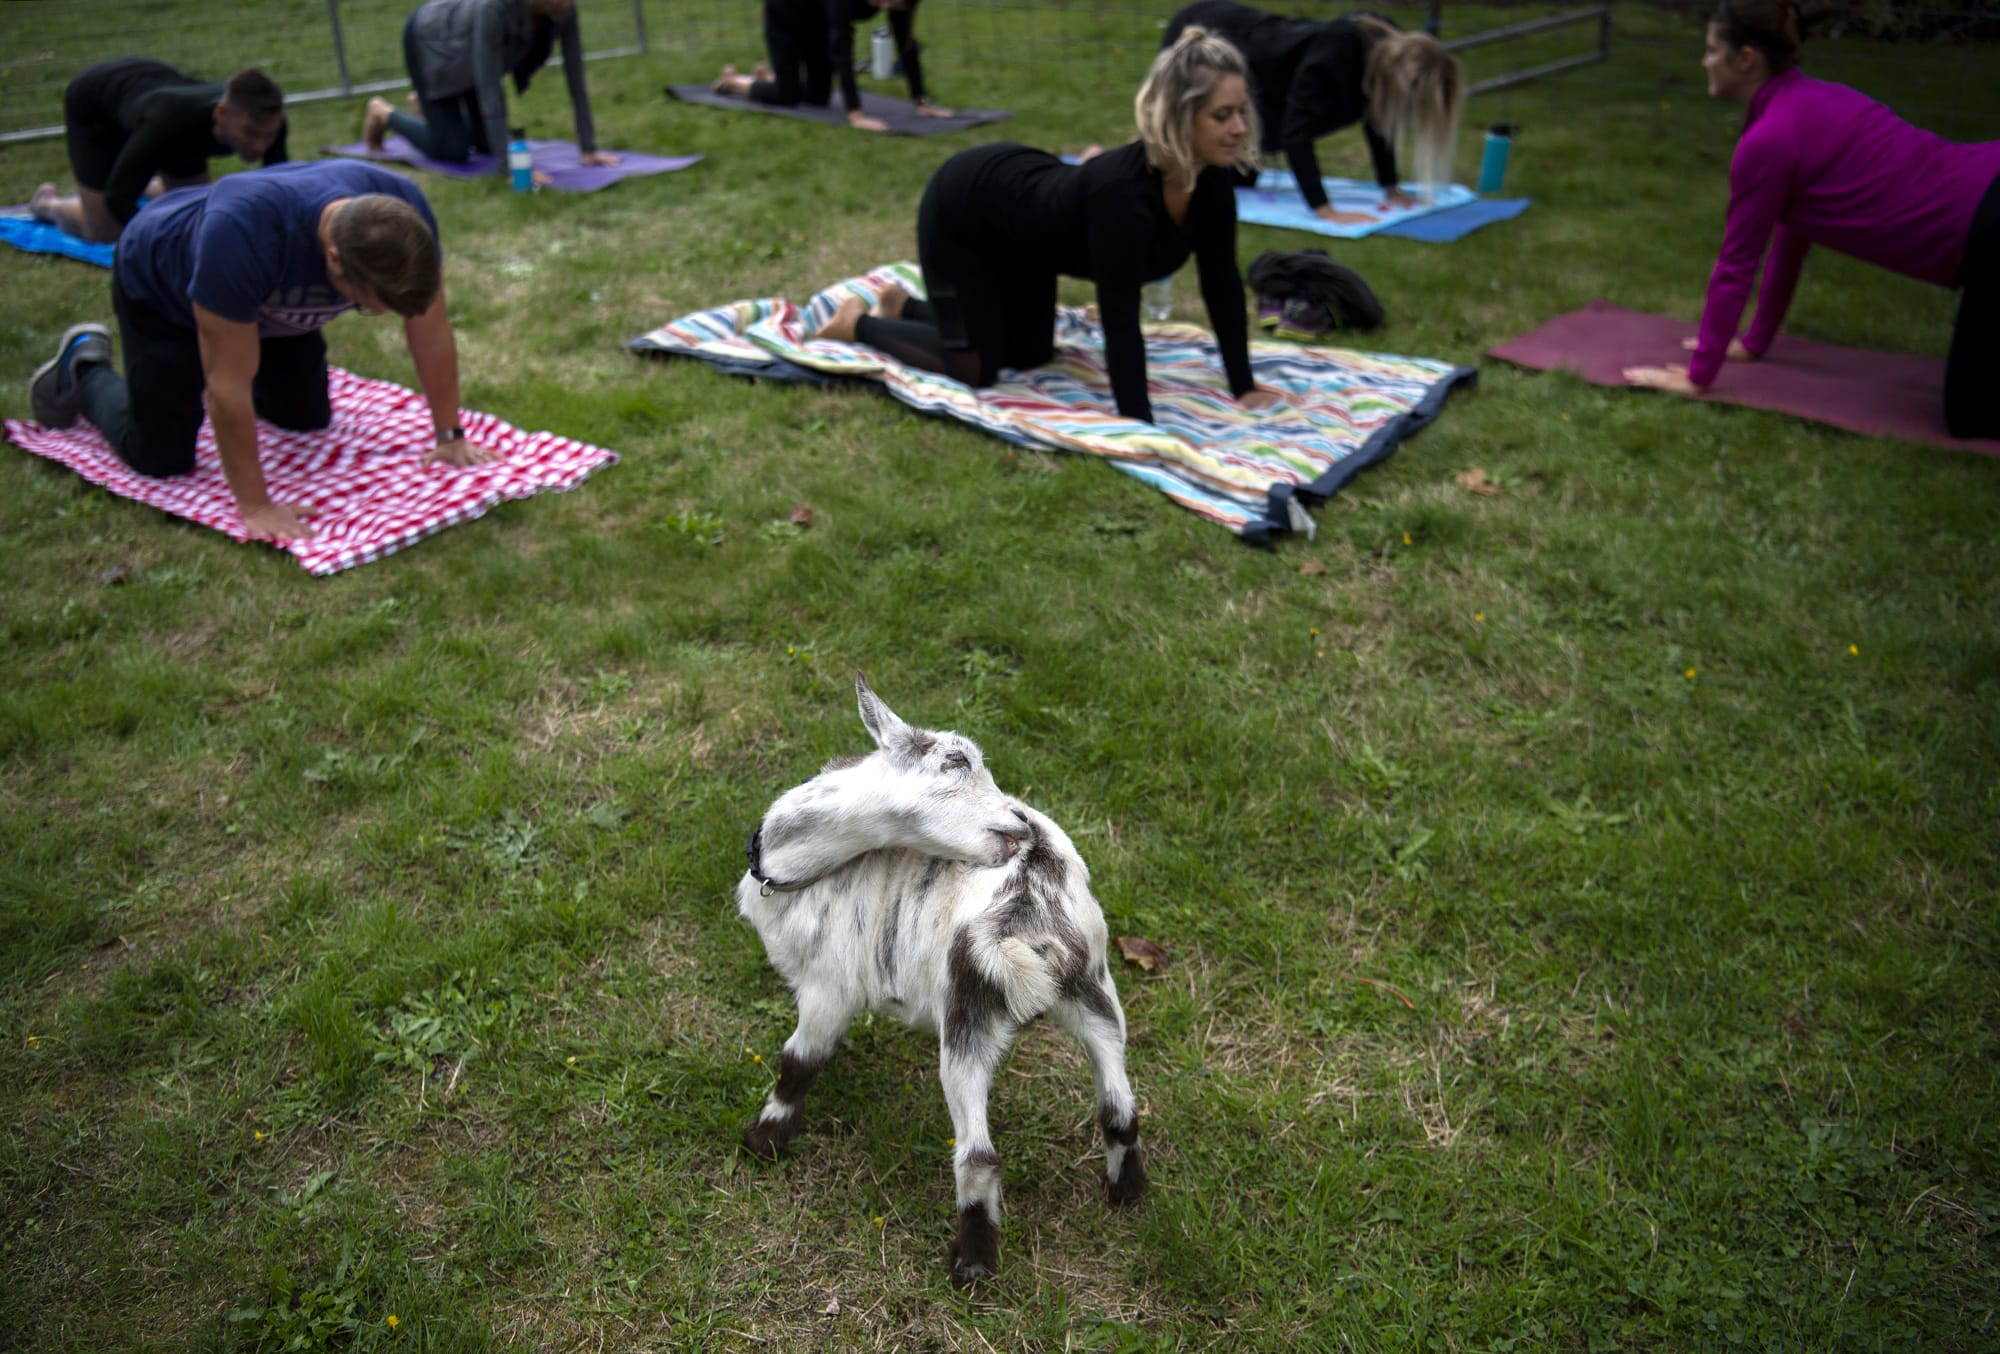 Maya the Nigerian Dwarf goat from Mini Mosaic Farm stretches to nibble her back during a goat yoga class in Central Park in Battle Ground on Sept. 19, 2019. The yoga class, put on by Barre 3 Felida, was part of Thursday’s Give More 24 fundraising event throughout Clark County. Proceeds from the class will benefit the North County Community Food Bank.